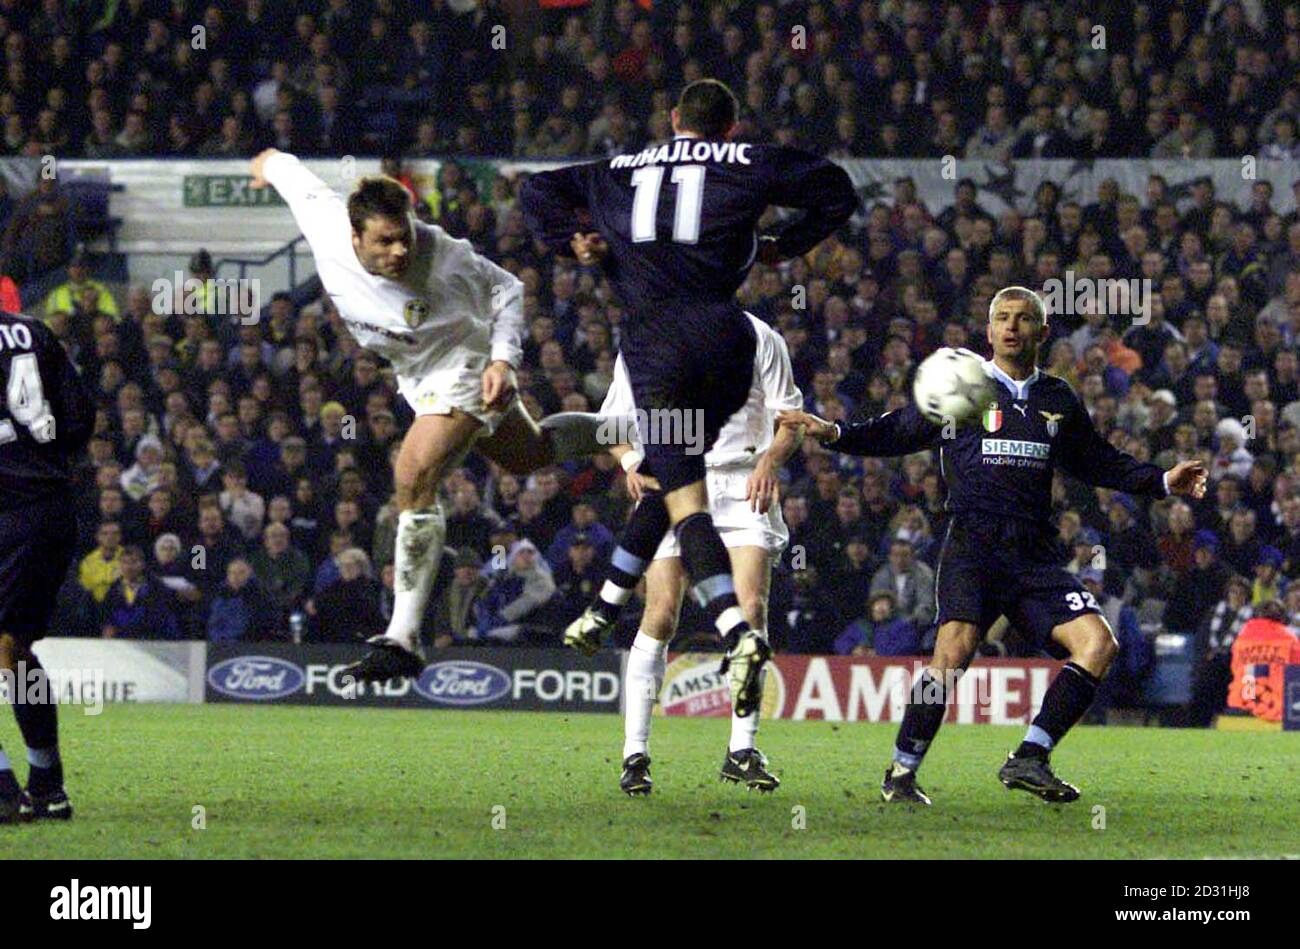 Leeds United's Mark Viduka (L) powers the ball past the Lazio defence to score, during their Champions League football match at Elland Road, in Leeds. Stock Photo